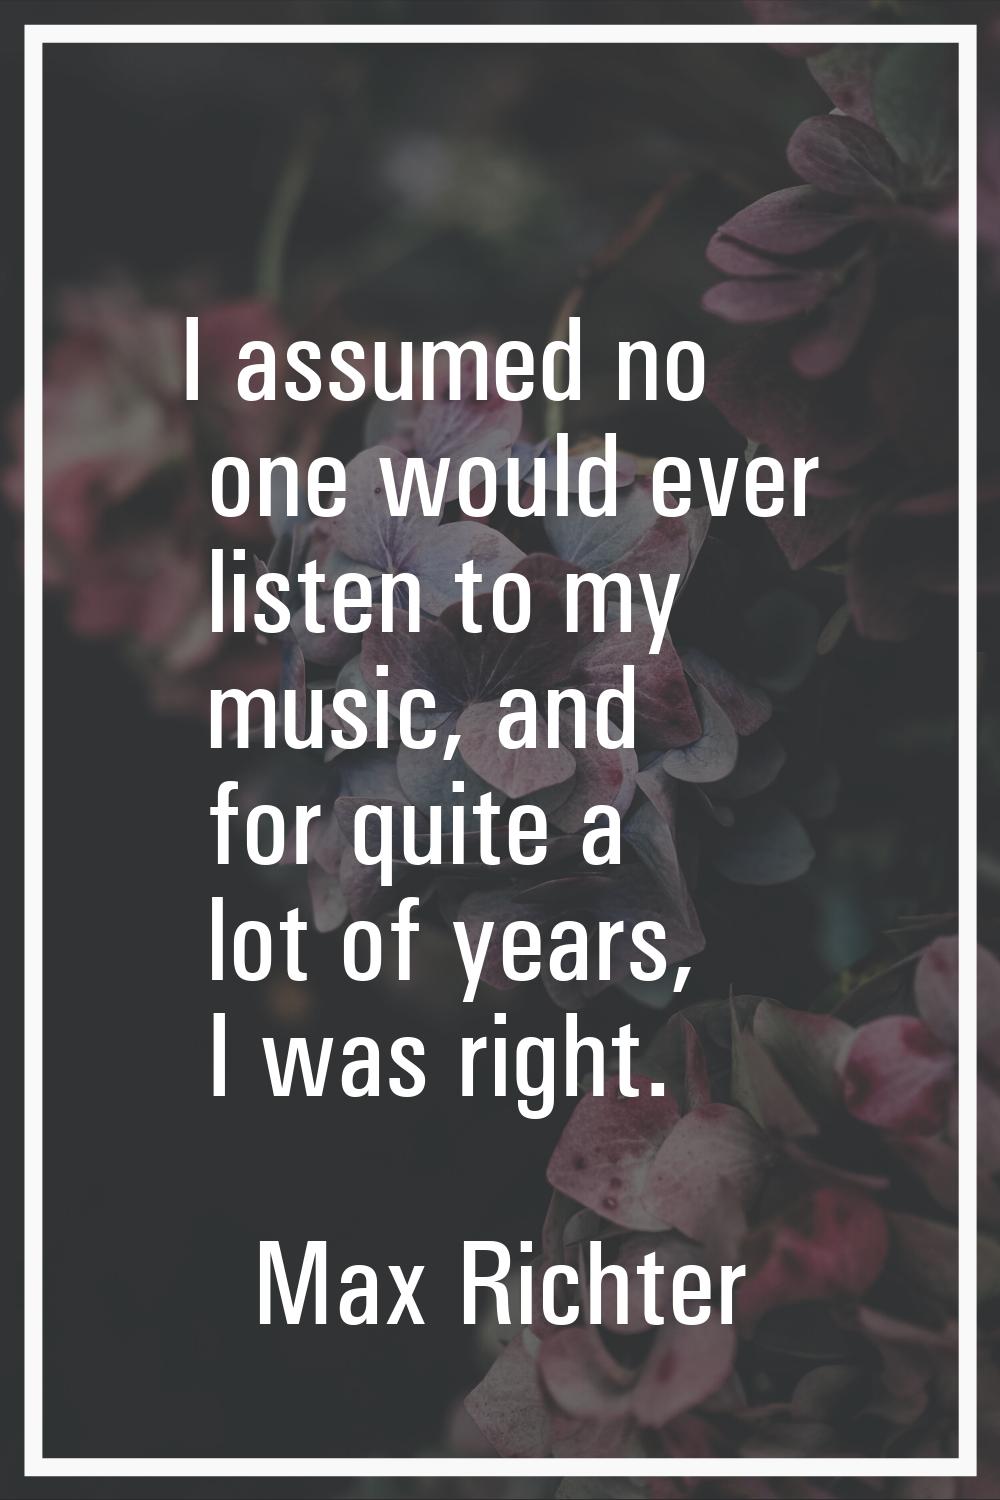 I assumed no one would ever listen to my music, and for quite a lot of years, I was right.